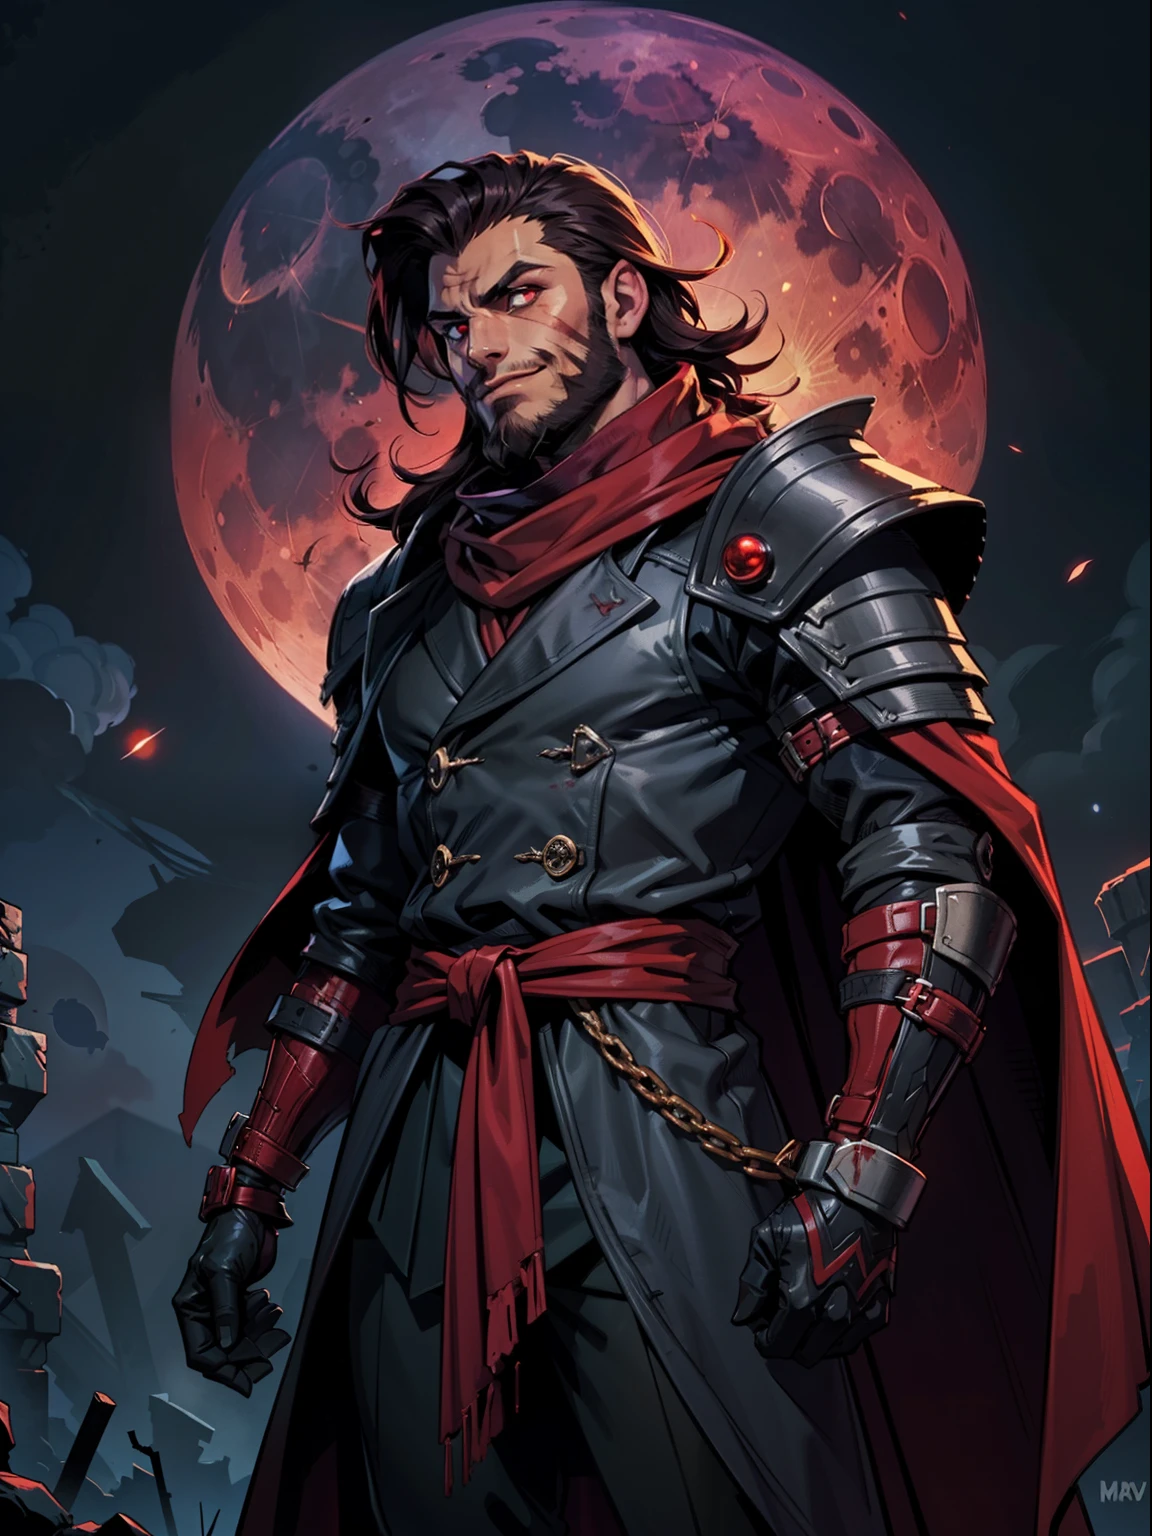 Dark night blood moon background, Darkest dungeon style, looking at the moon, game portrait, Sadurang from Marvel, hunk, short mane hair, mullet, defined face, detailed eyes, short beard, glowing red eyes, dark hair, wily smile, badass, dangerous, wearing classy trench overcoat over armor and red scarf